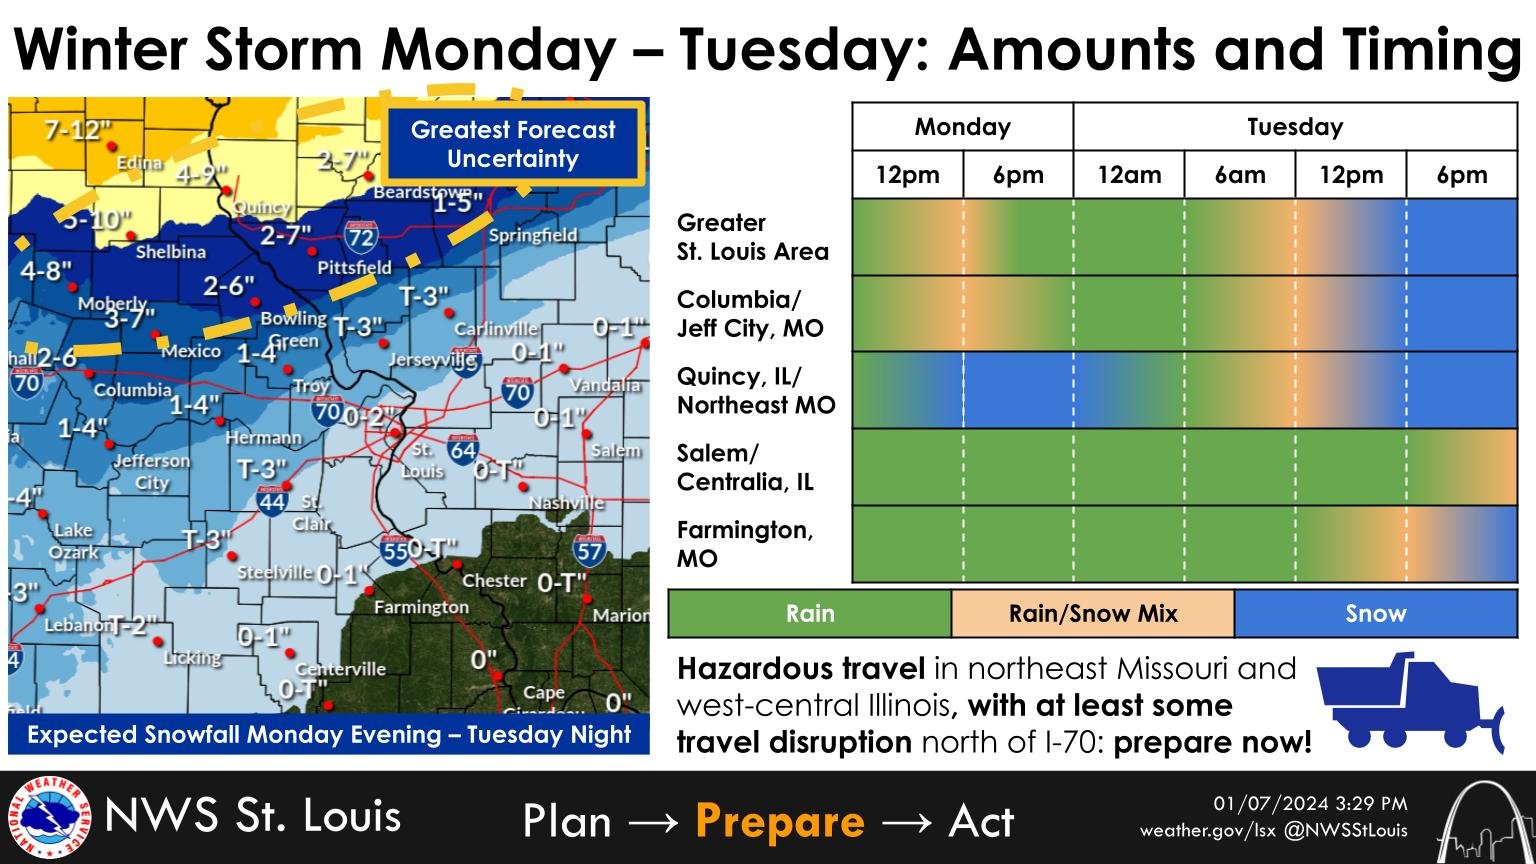 (LISTEN): One to four inches of snow expected in mid-Missouri from Monday through Tuesday